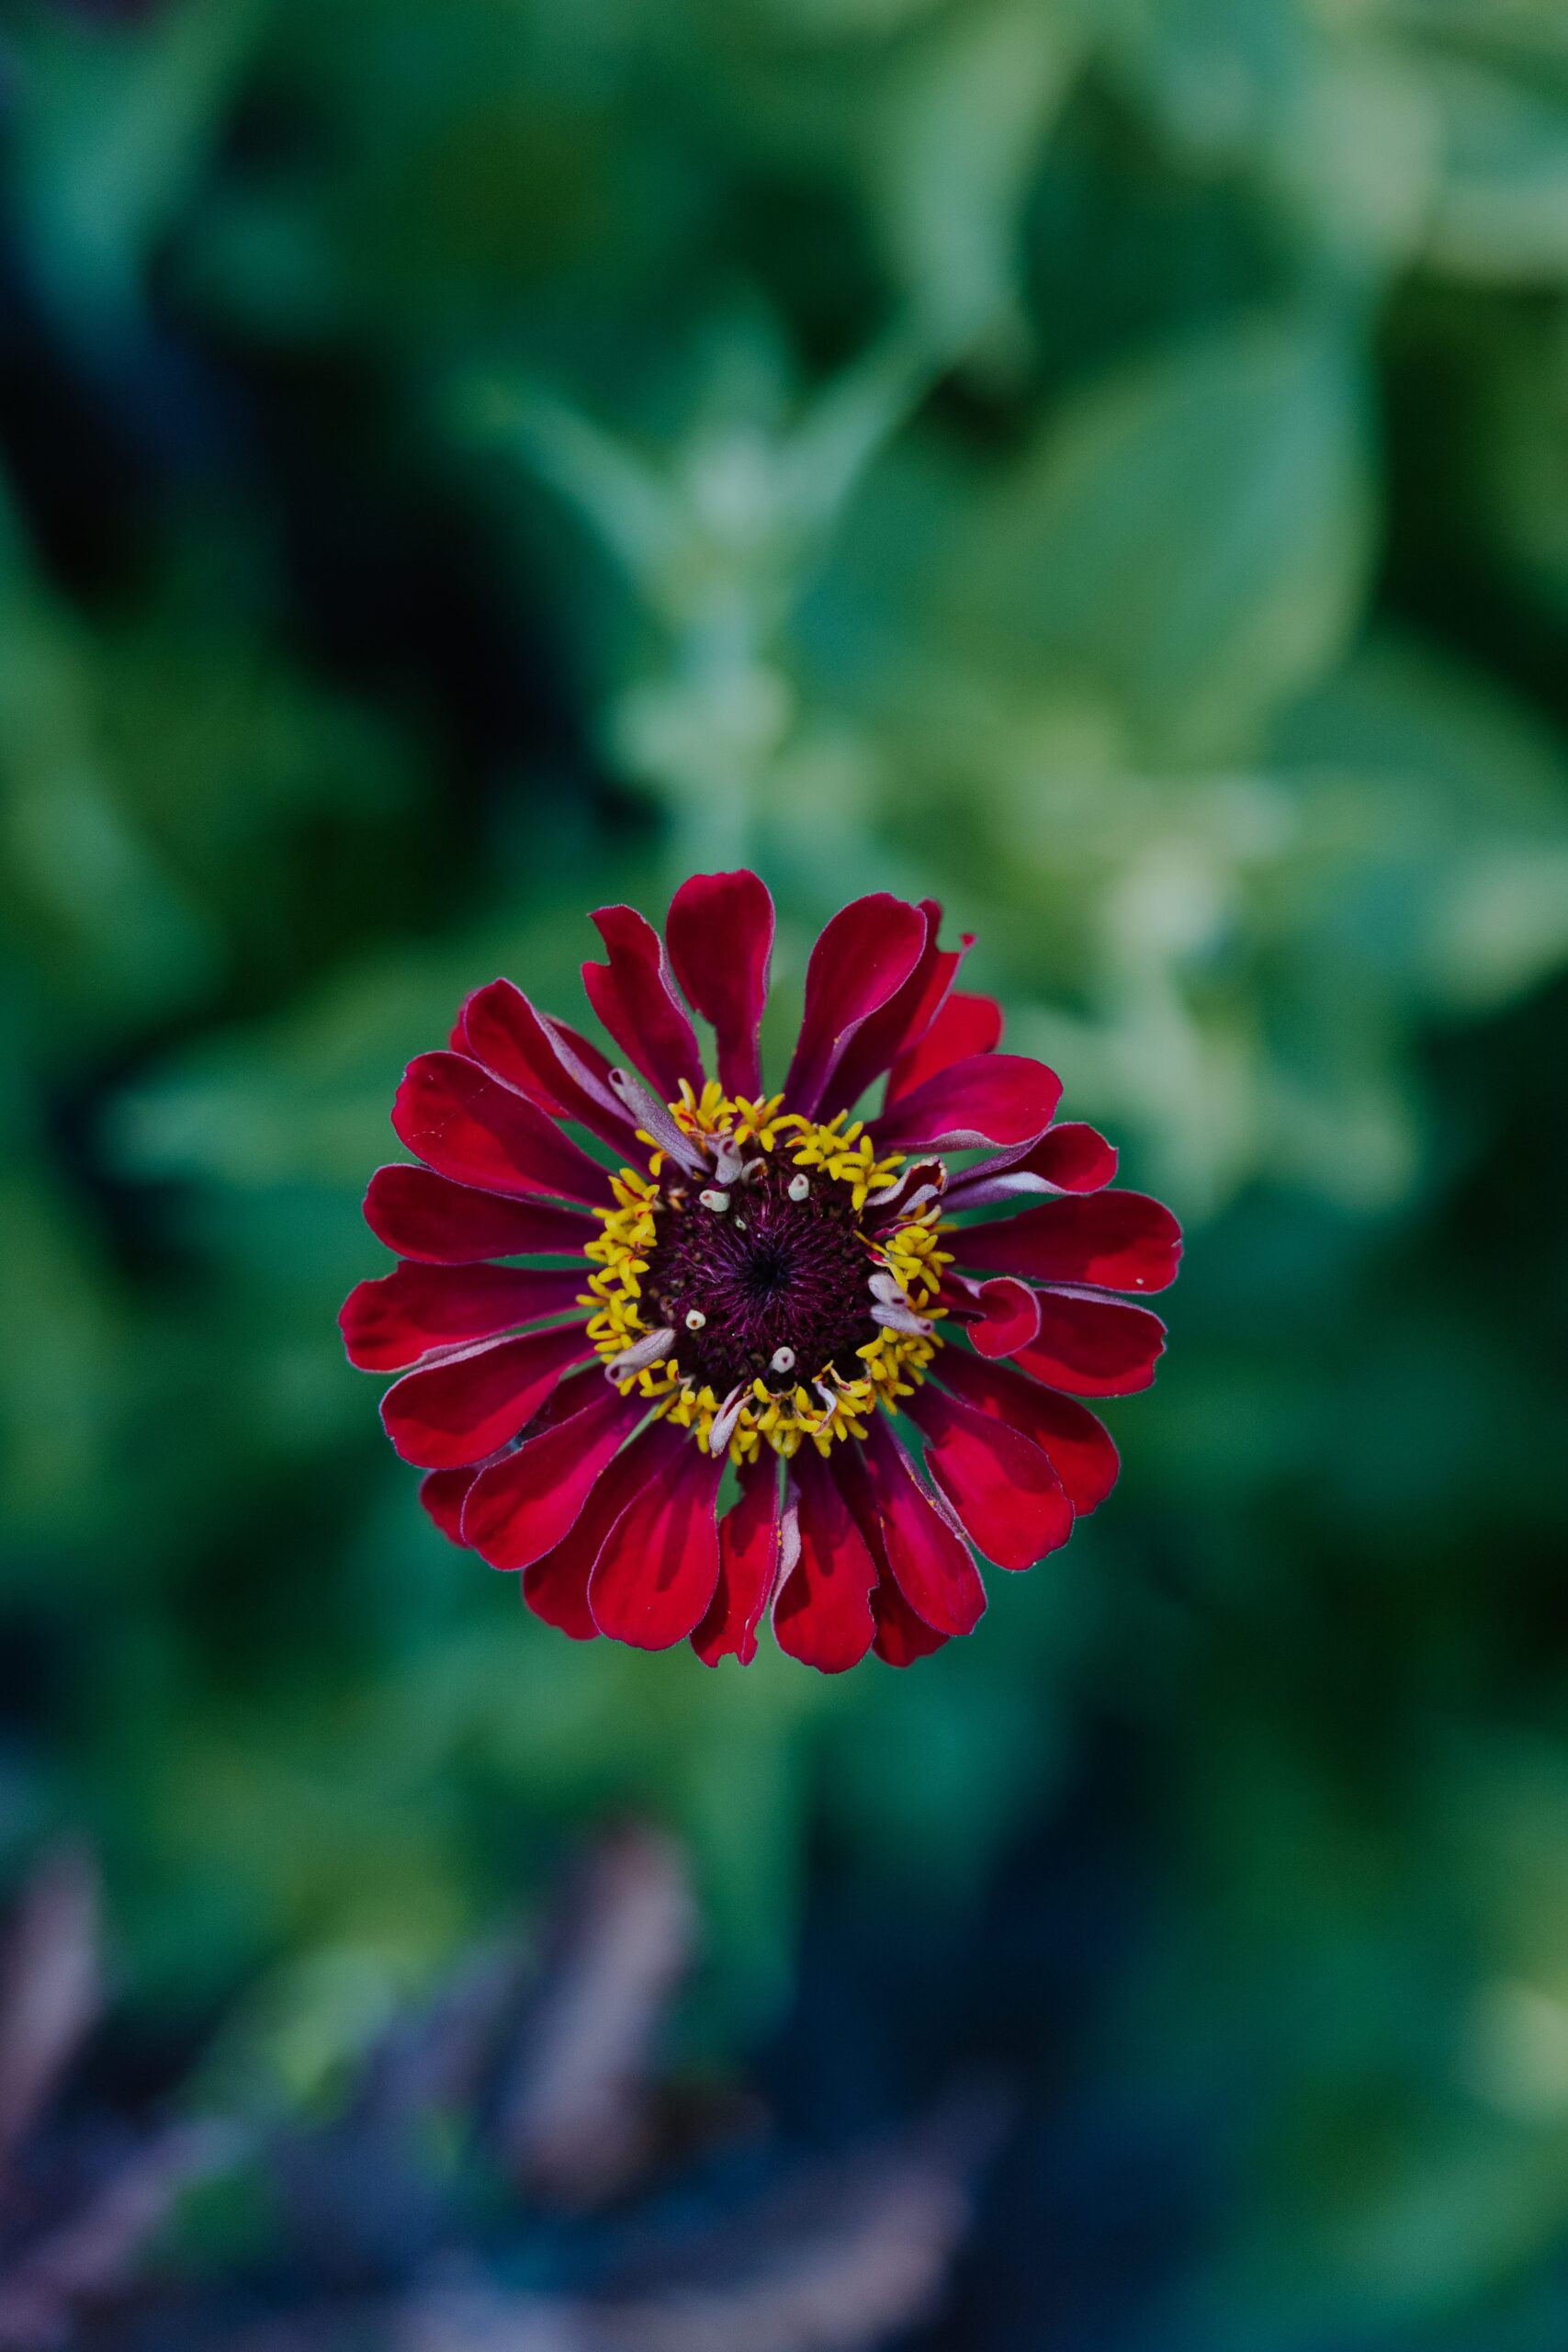 Close-up of a vibrant red zinnia flower with yellow stamens, highlighting its detailed petals and a soft, blurred green background.